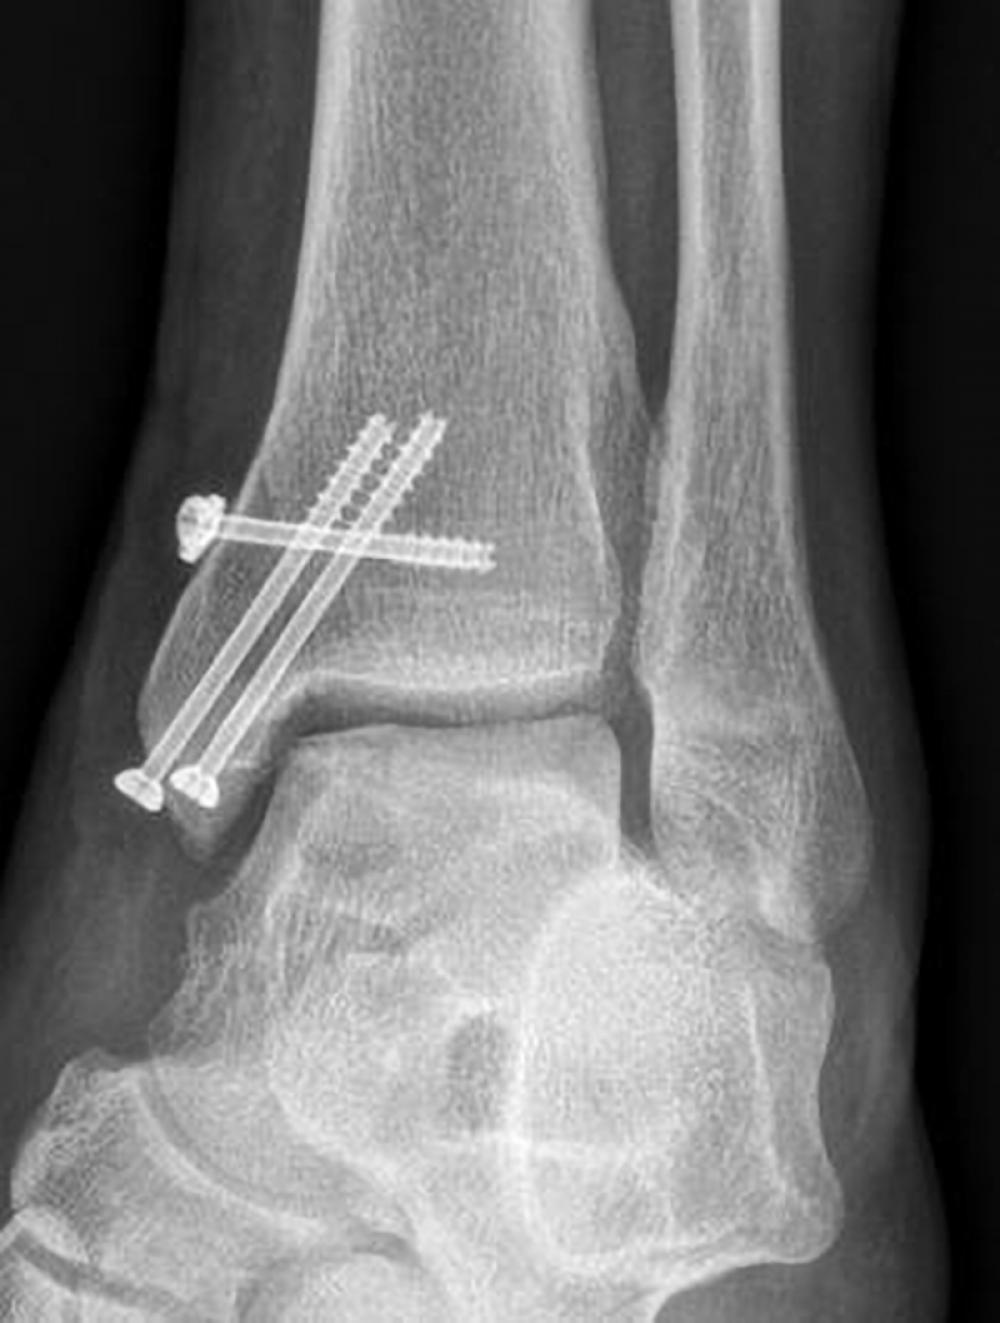 Post-operative X-ray of ankle